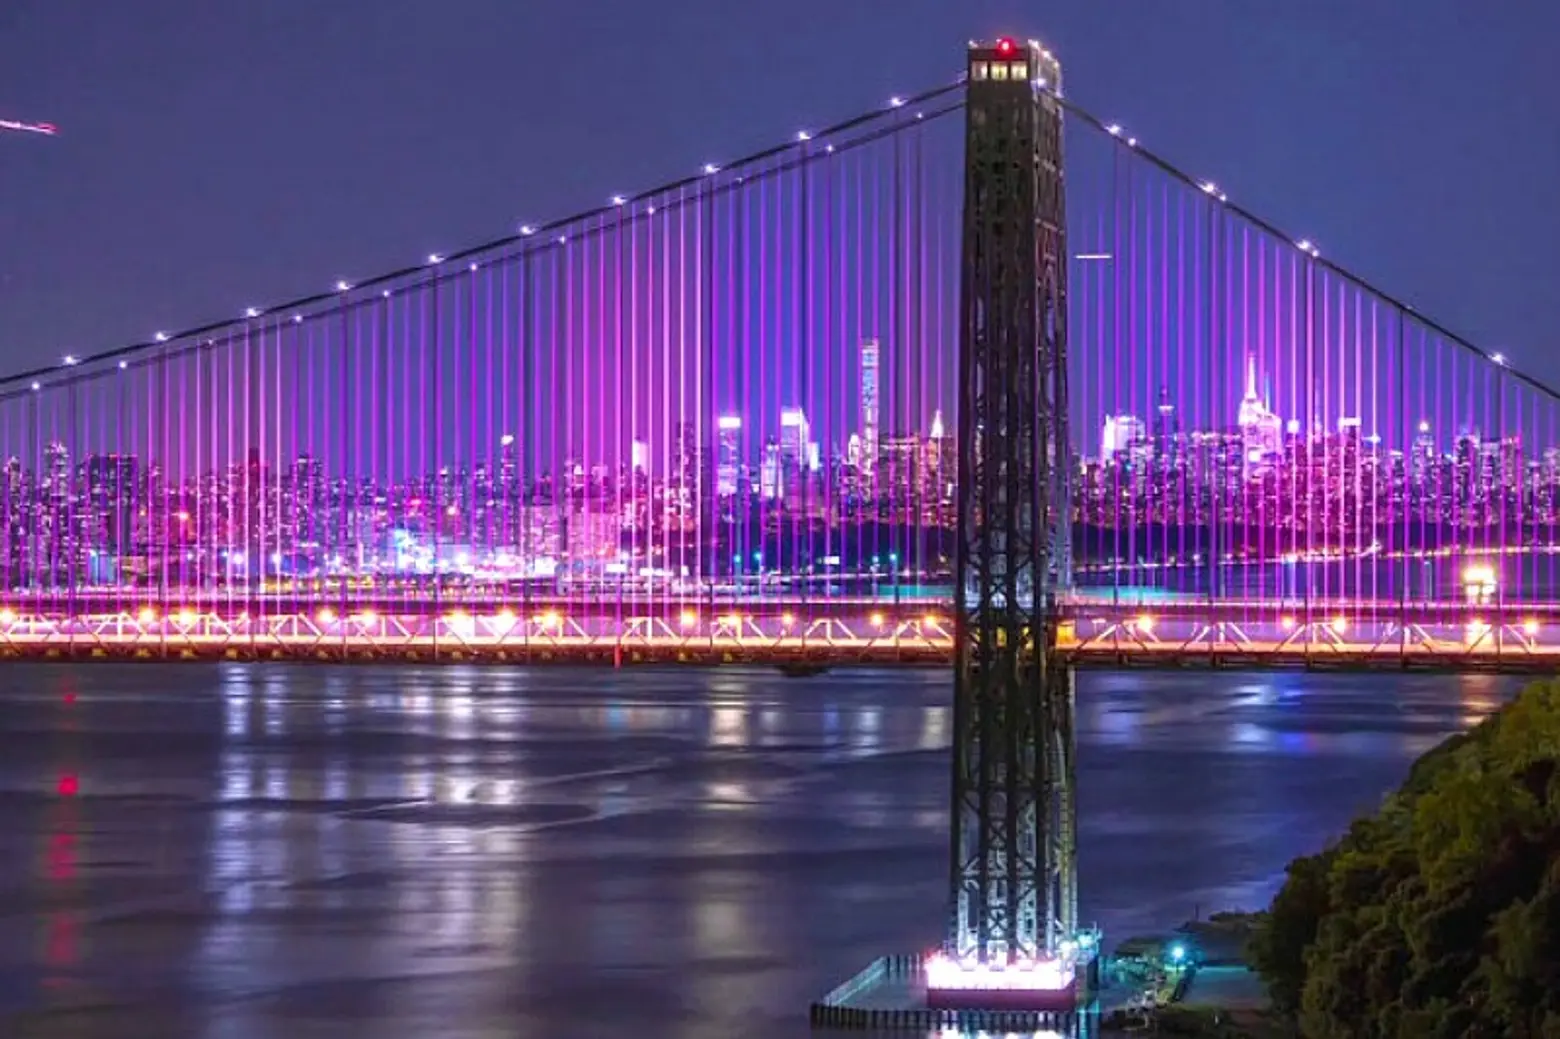 Governor Cuomo reveals new details about LED light shows coming to NYC bridges and tunnels